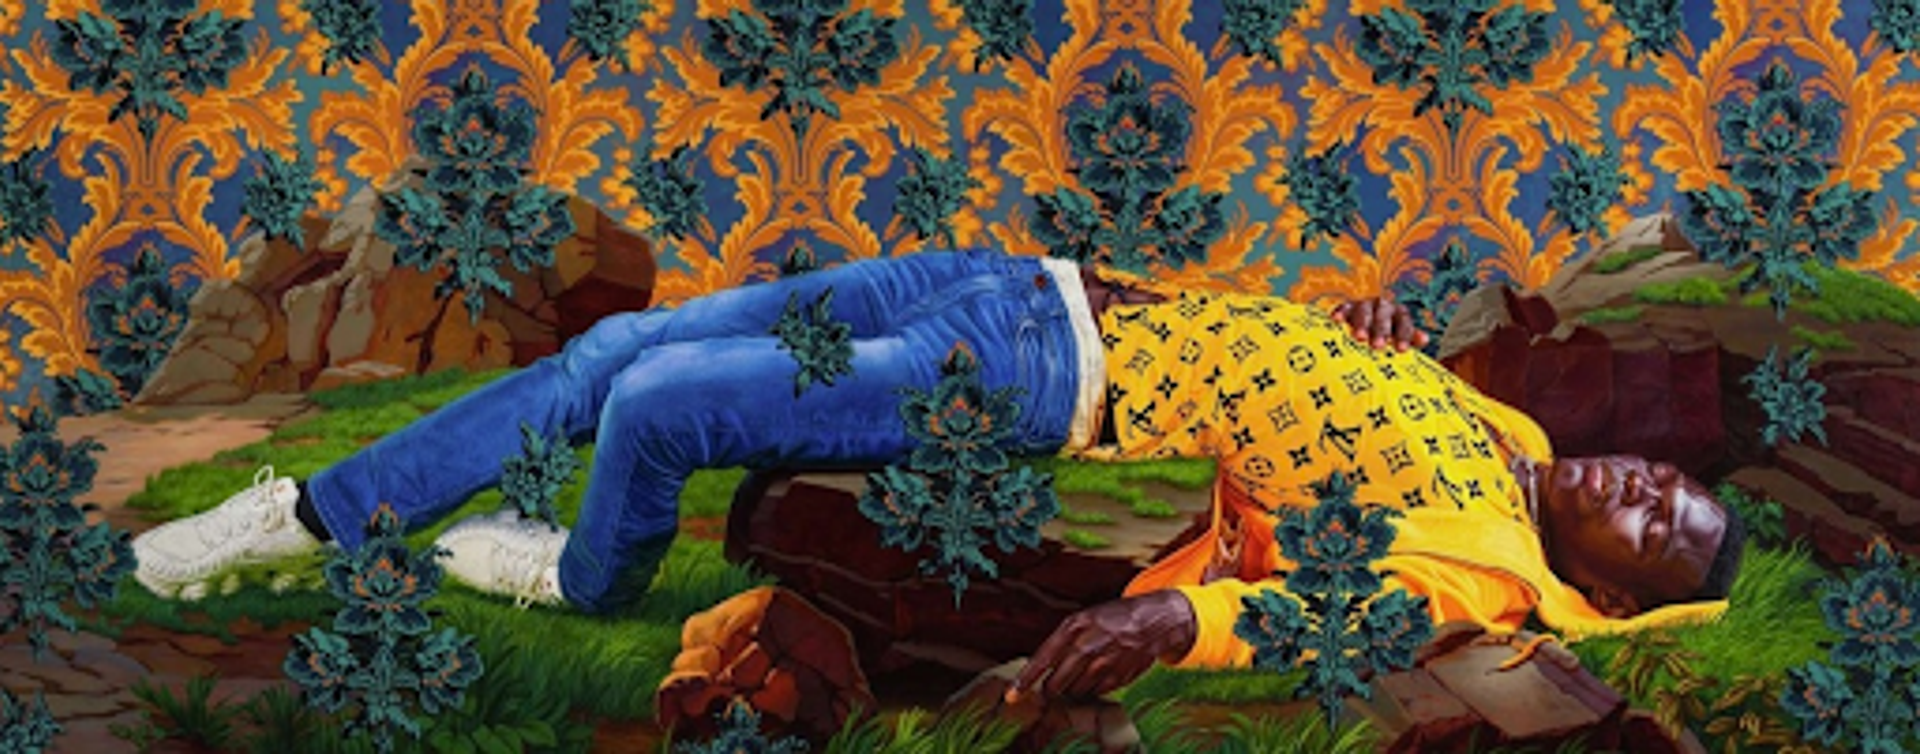 Kehinde Wiley’s Femme Piquée Par Un Serpent (Mamadou Gueye). A portrait of a man dressed in a Louis Vuitton shirt and jeans lying down against stones in a lush landscape against a rococo background.